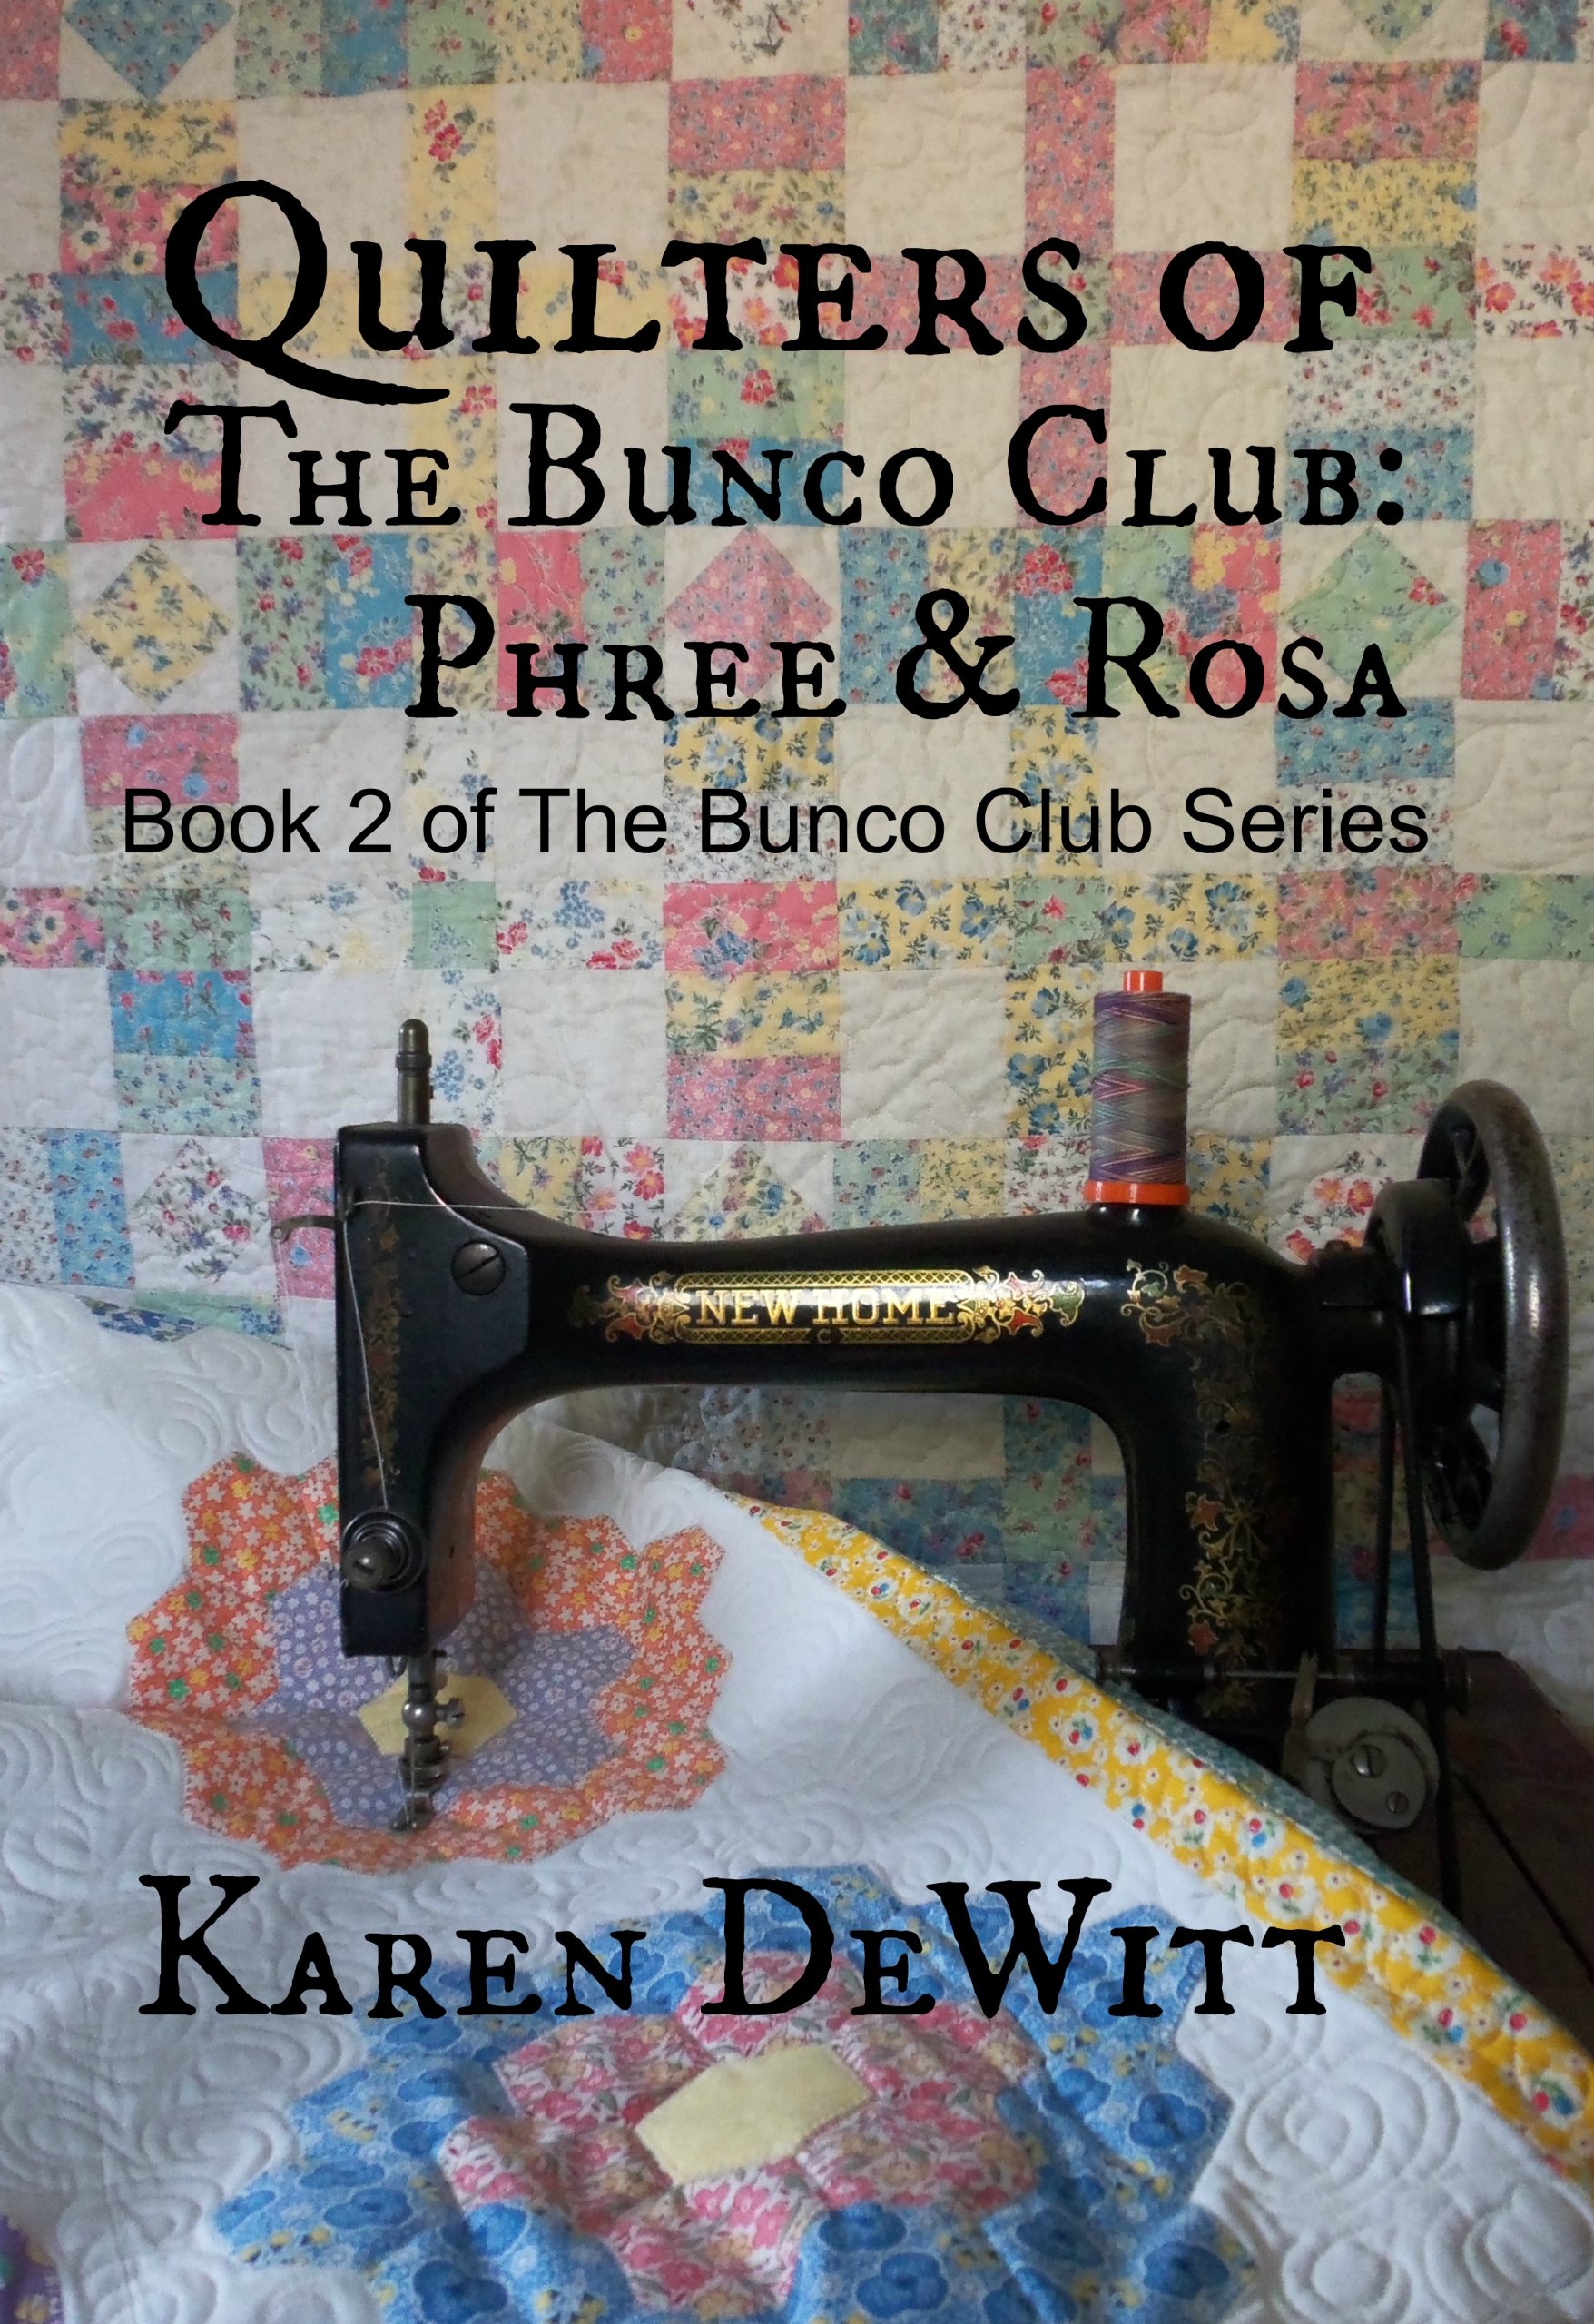 Quilters of The Bunco Club: Phree & Rosa (The Bunco Club Series Book 2)